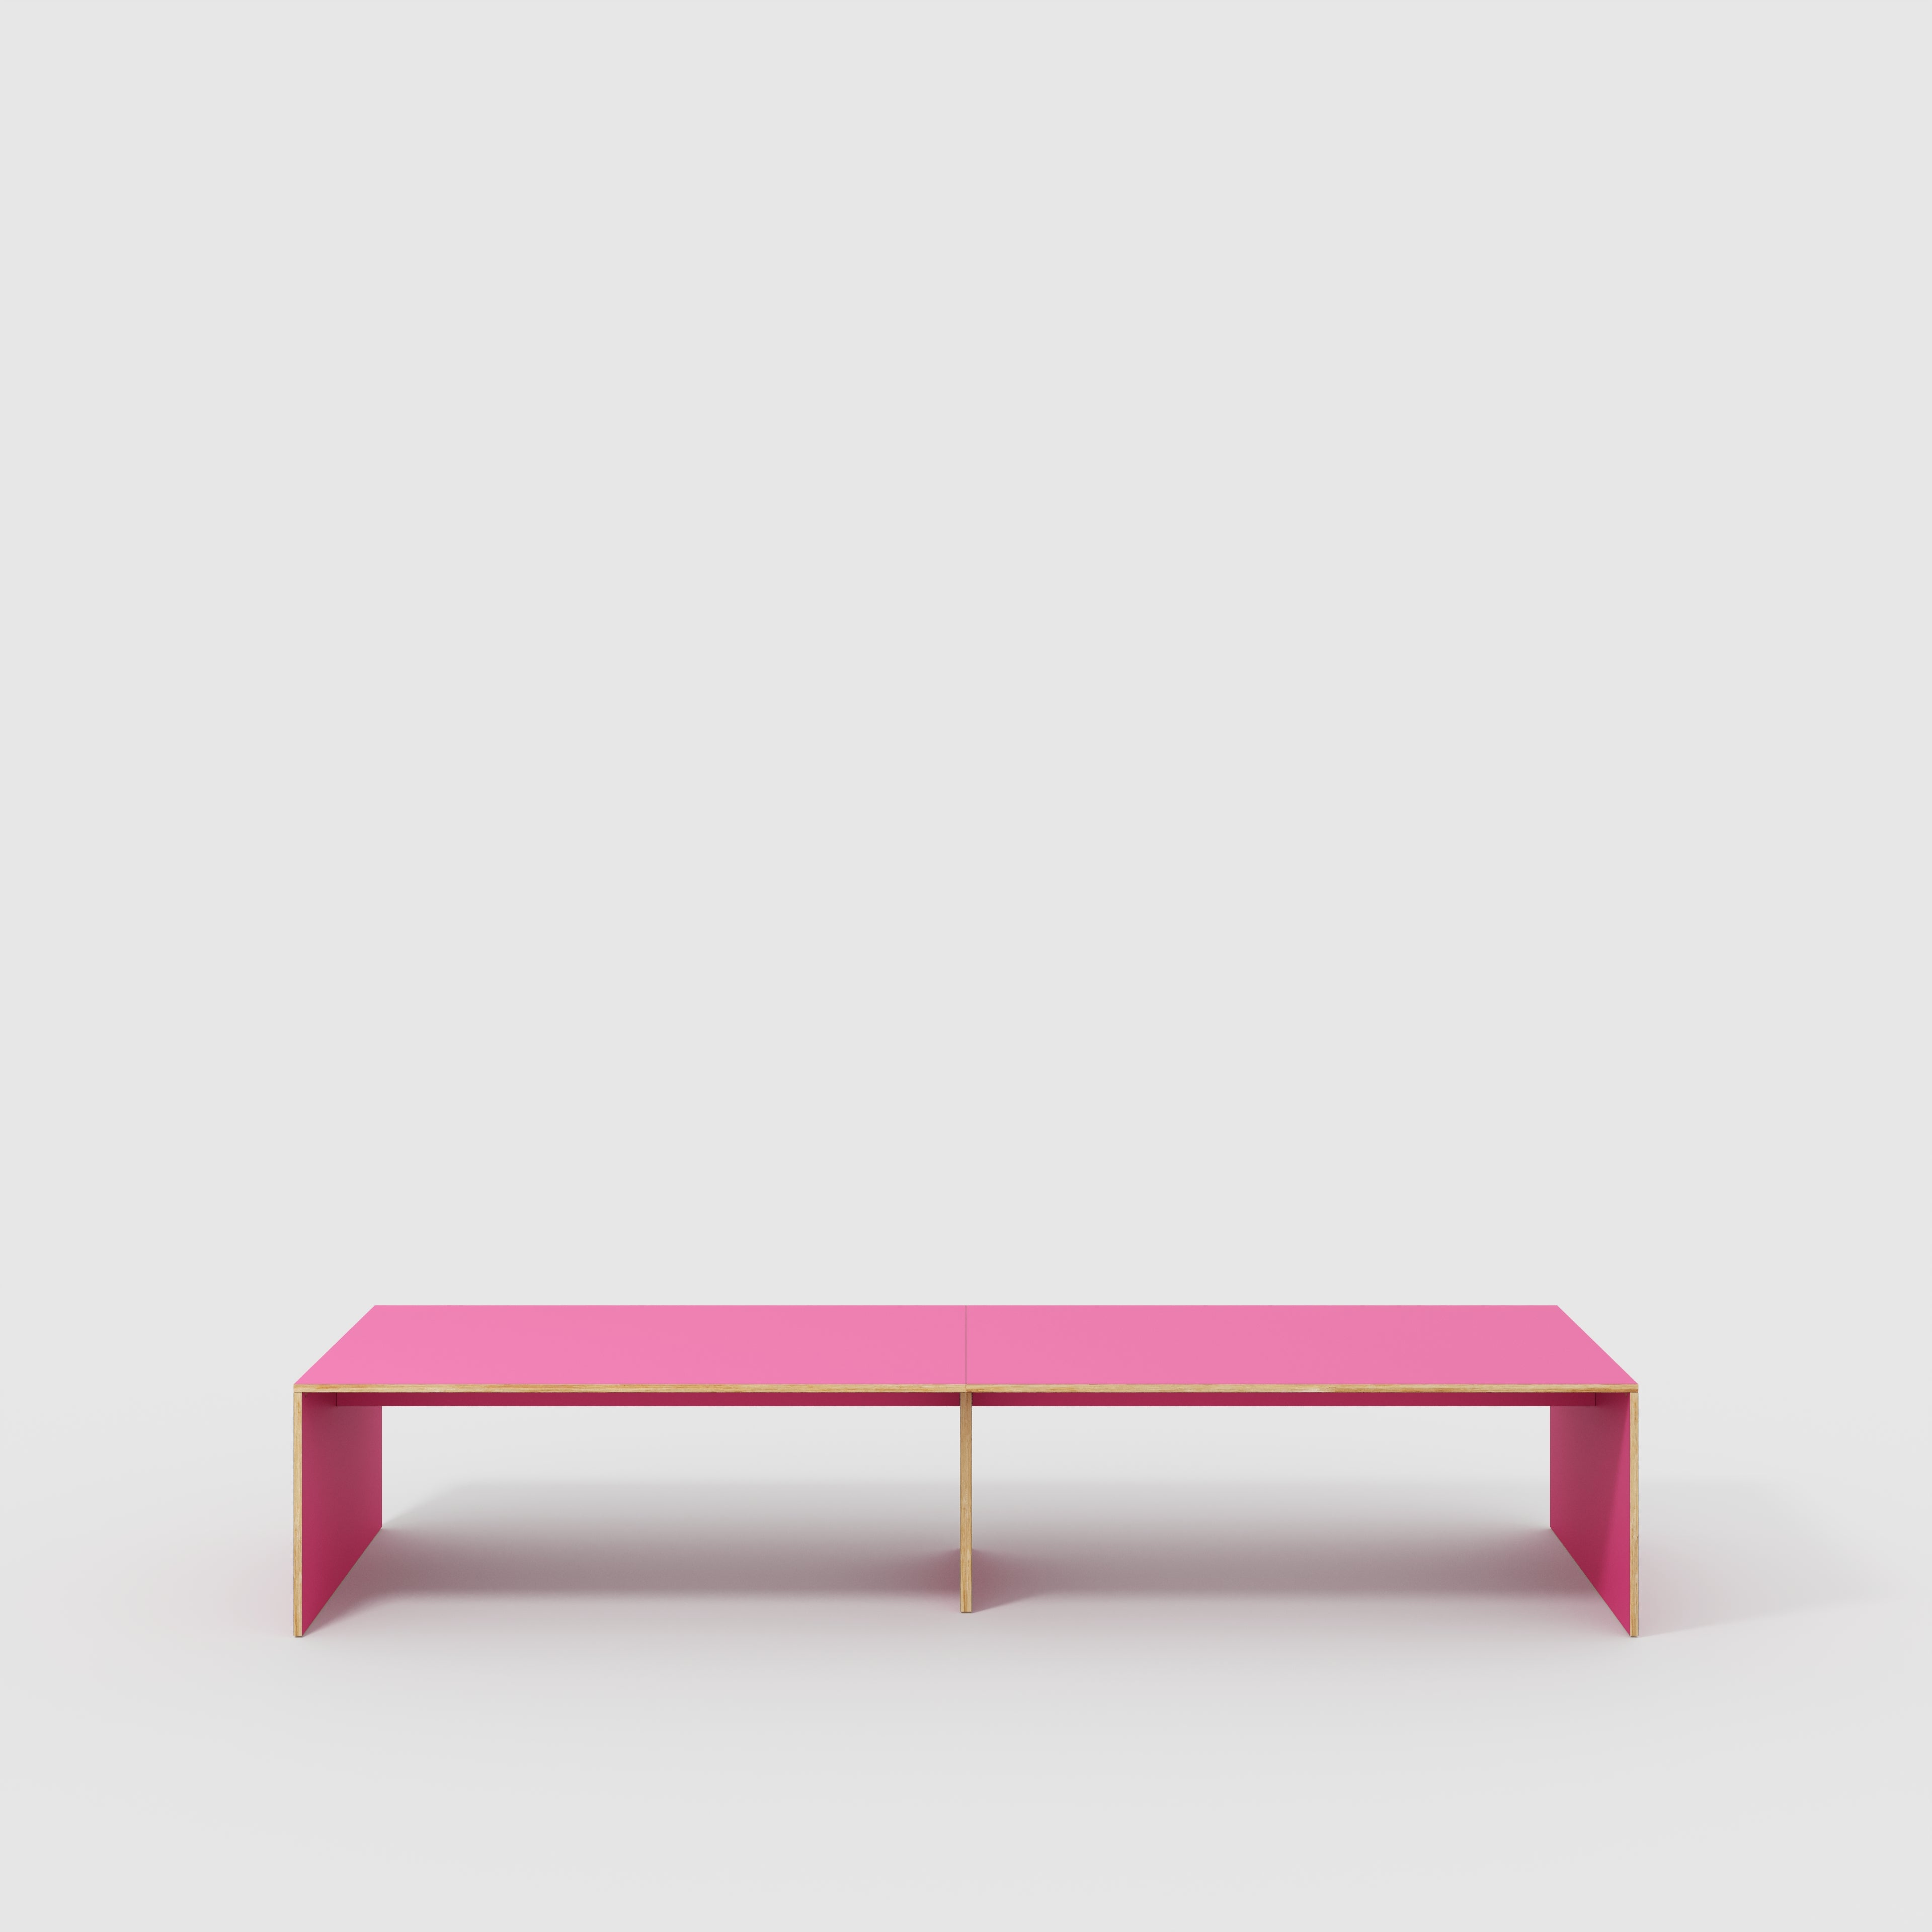 Table with Solid Sides - Formica Juicy Pink - 4000(w) x 1000(d) x 735(h)